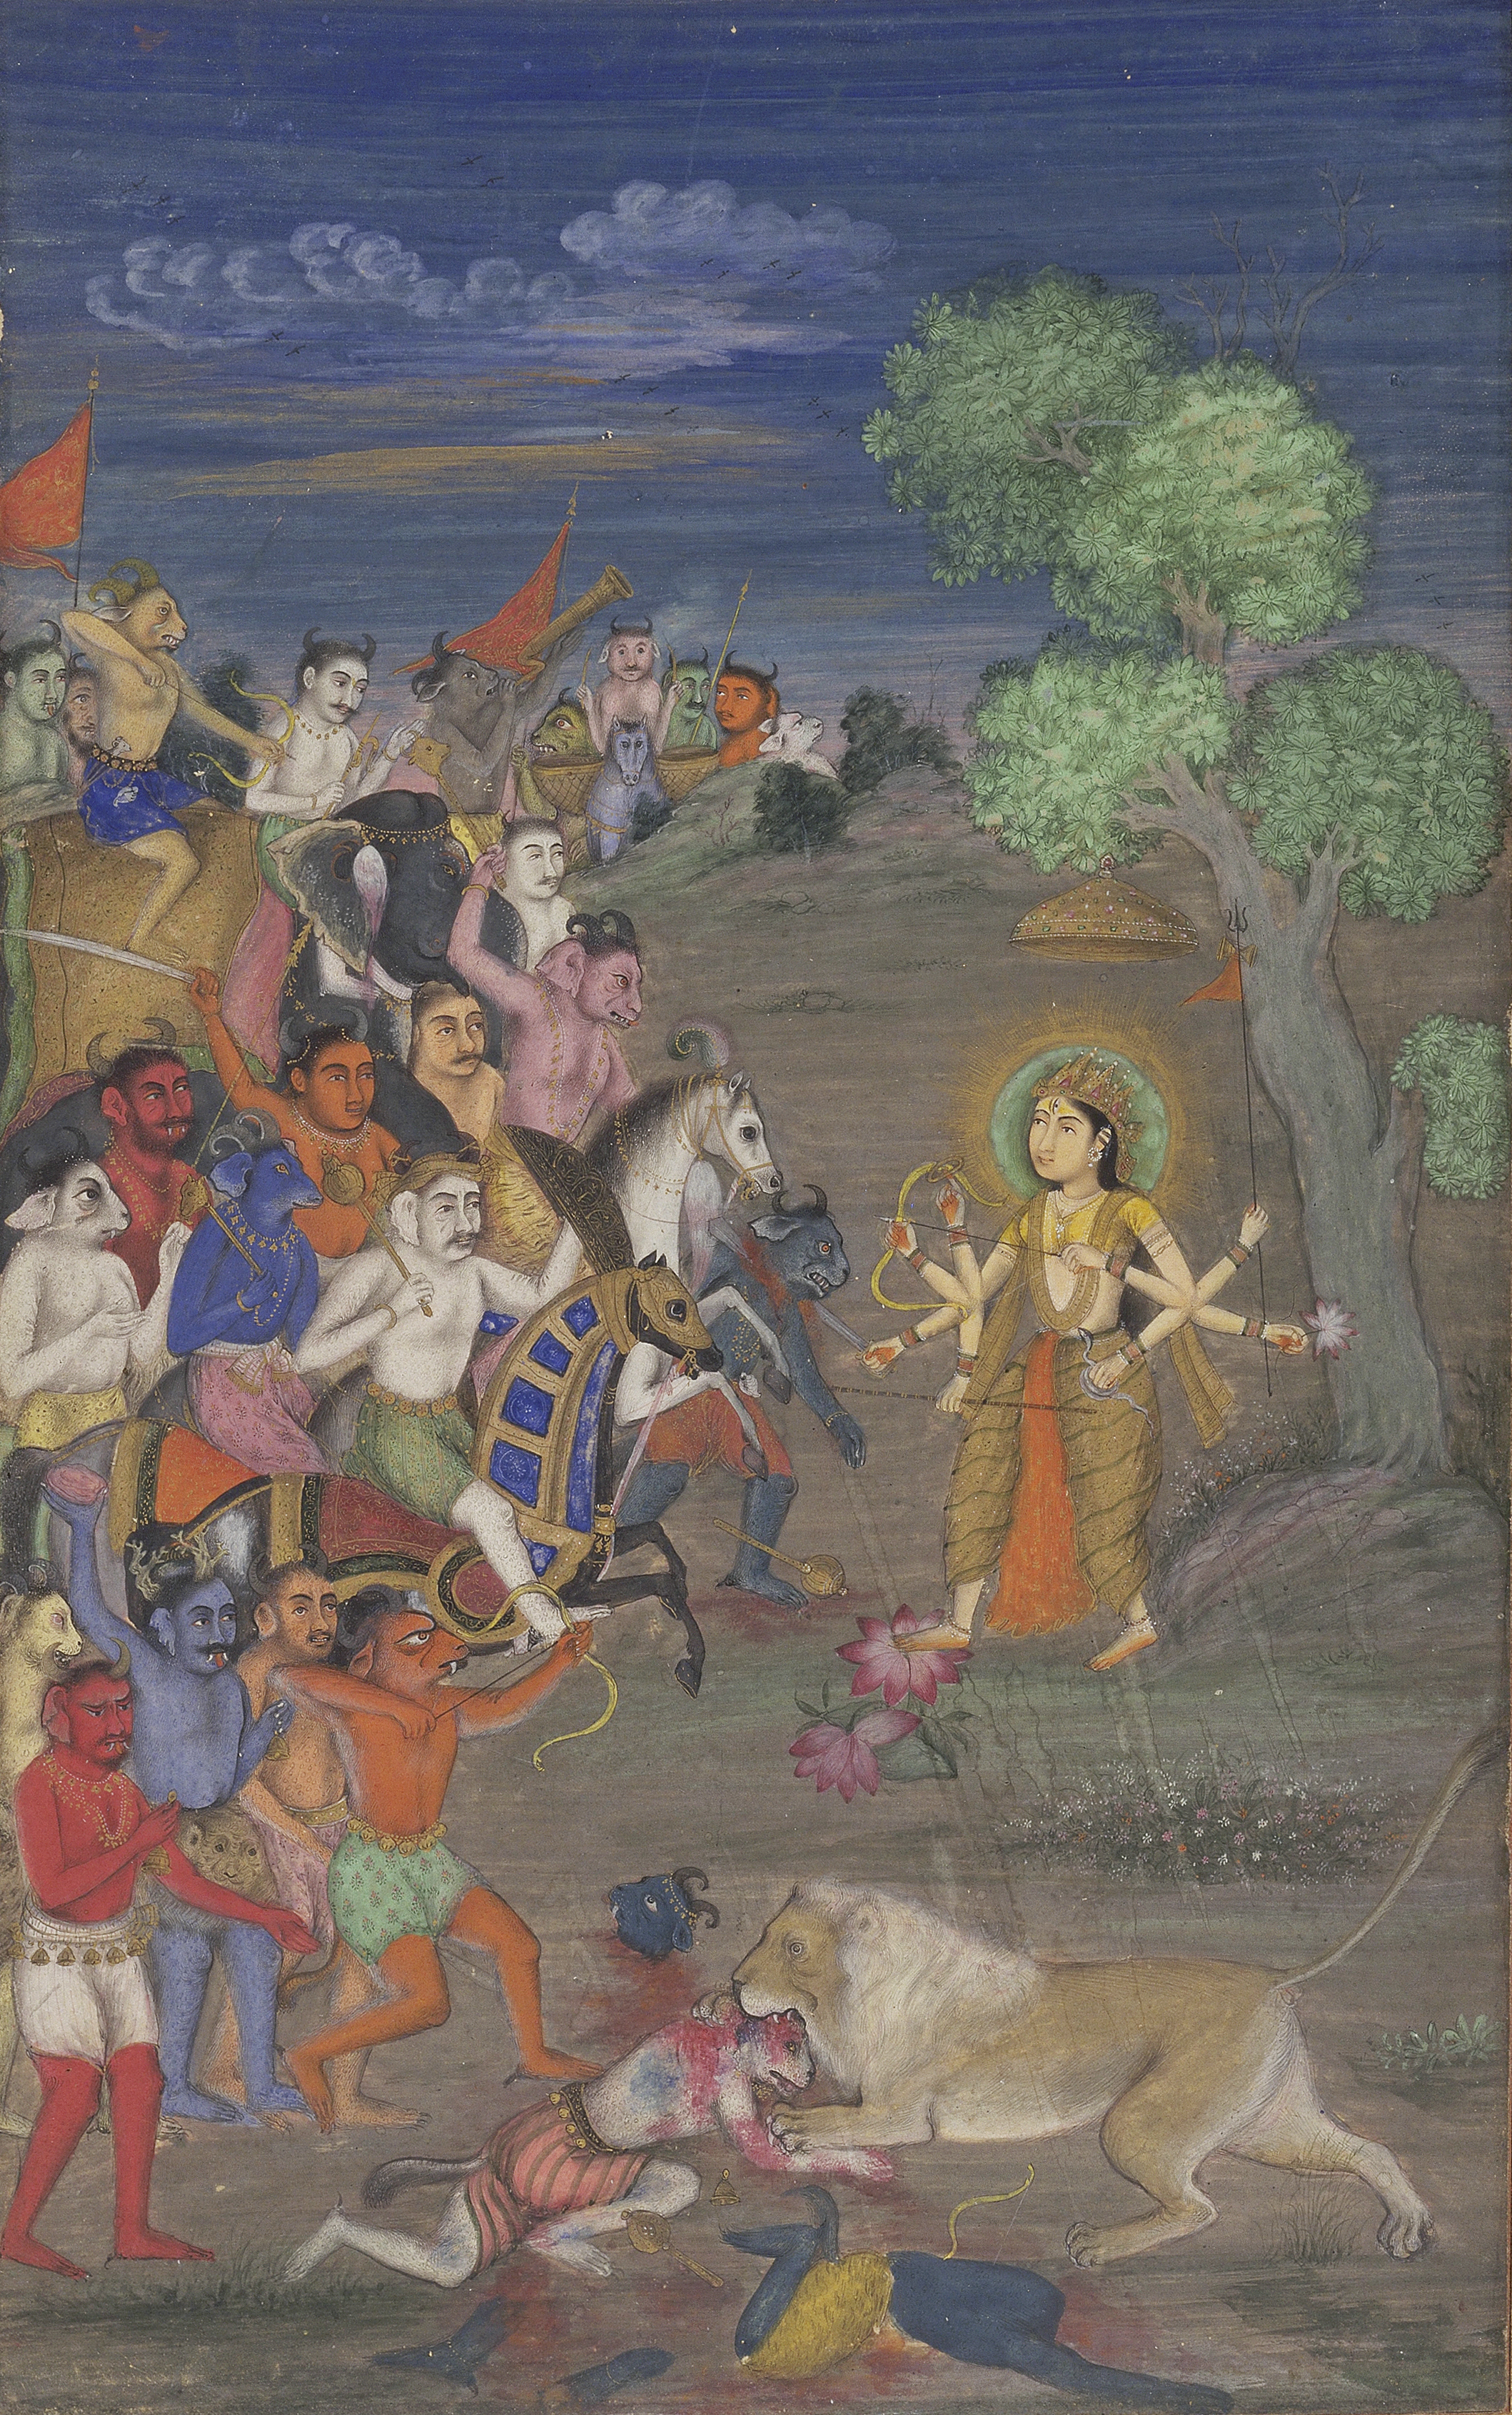 Colorful detailed in dark reds and blues of a woman in robe with many arms about to battle with an army of men and demons on foot and on horseback